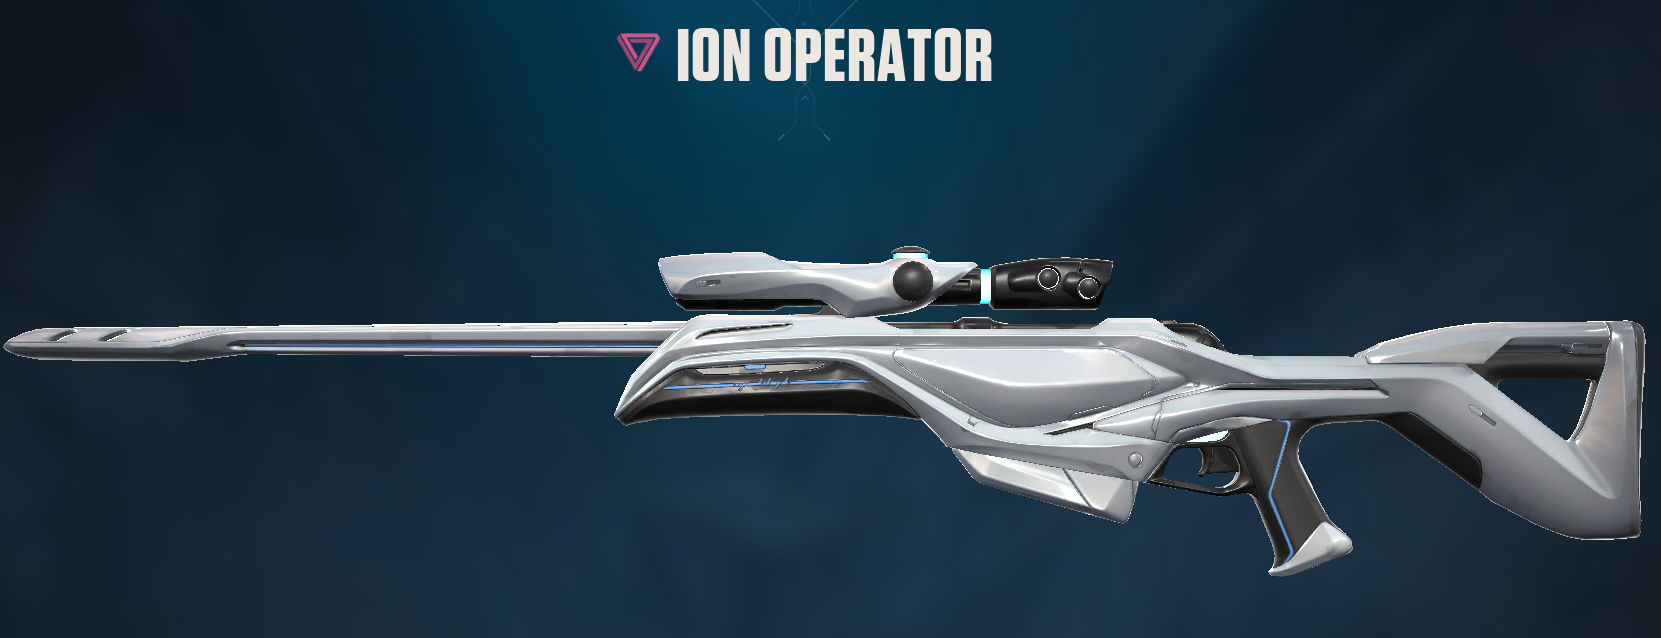 Ion Operator. Credit: Riot Games